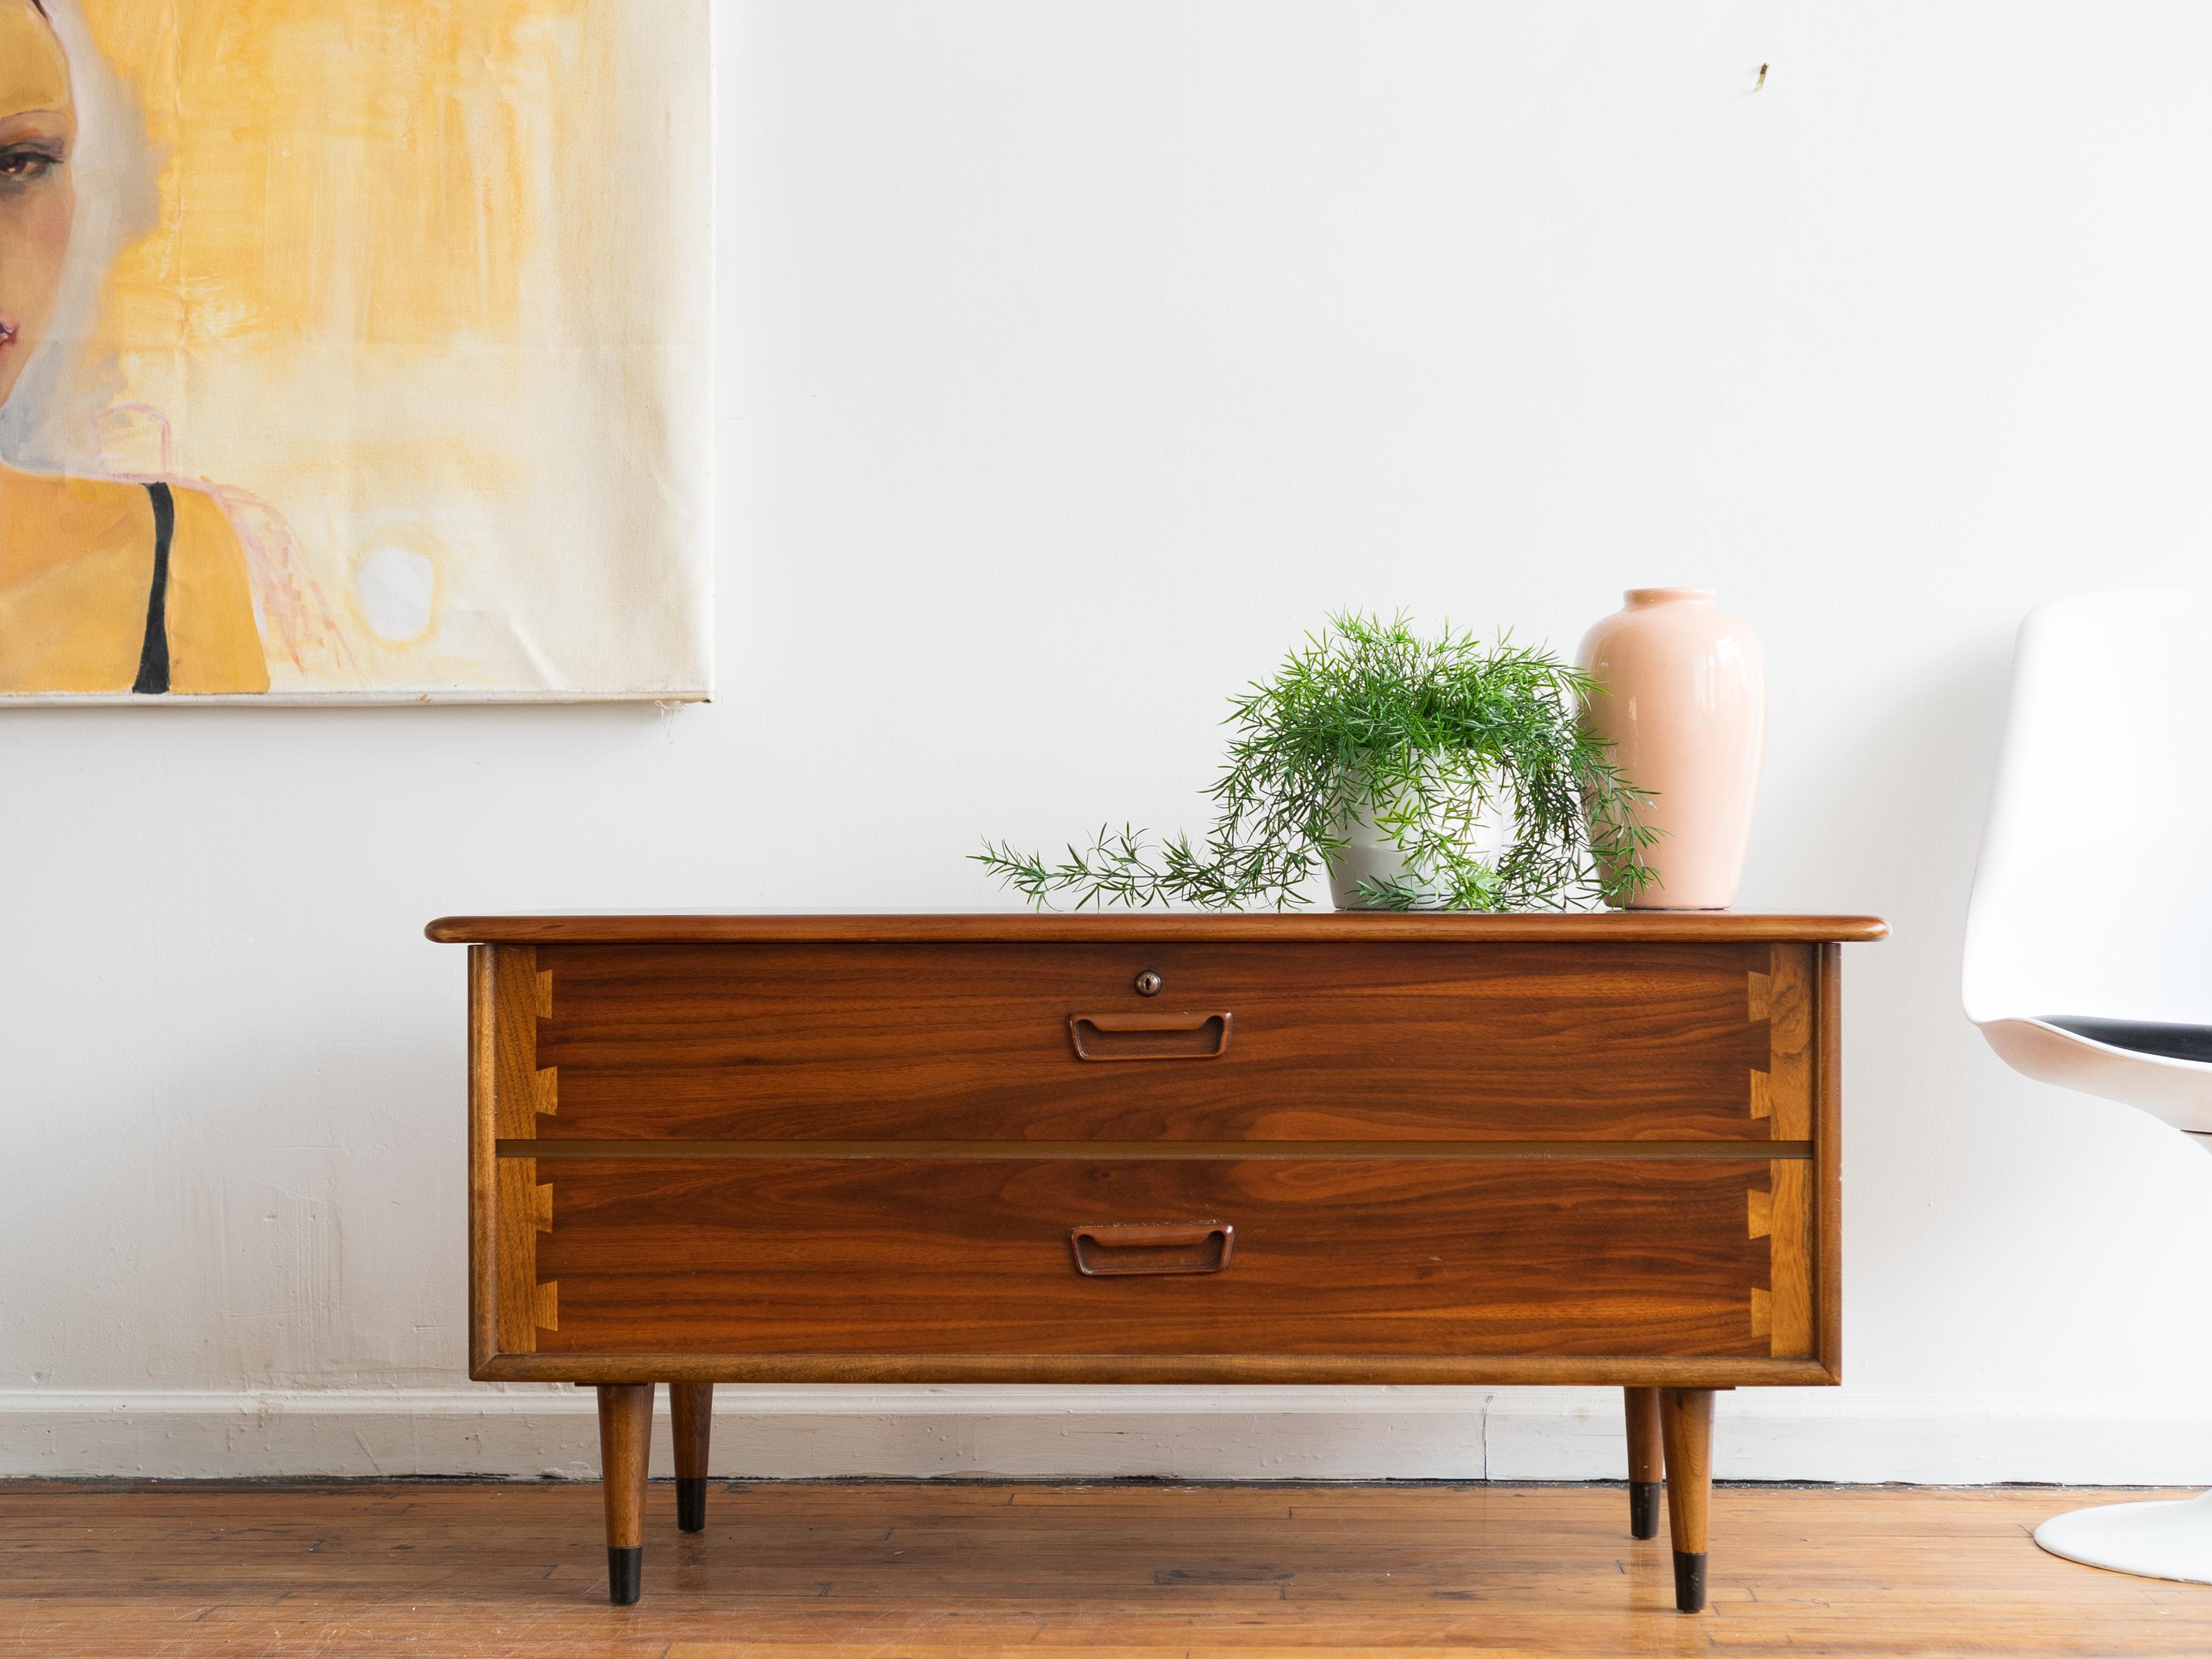 343” x 17” x 21”H

Gorgeous Lane Acclaim cedar chest in a slightly smaller size. Features the line's signature dovetail inlays, black-capped tapered legs, and three faux drawers with recessed pulls. This retains the original air-tight seal so it's